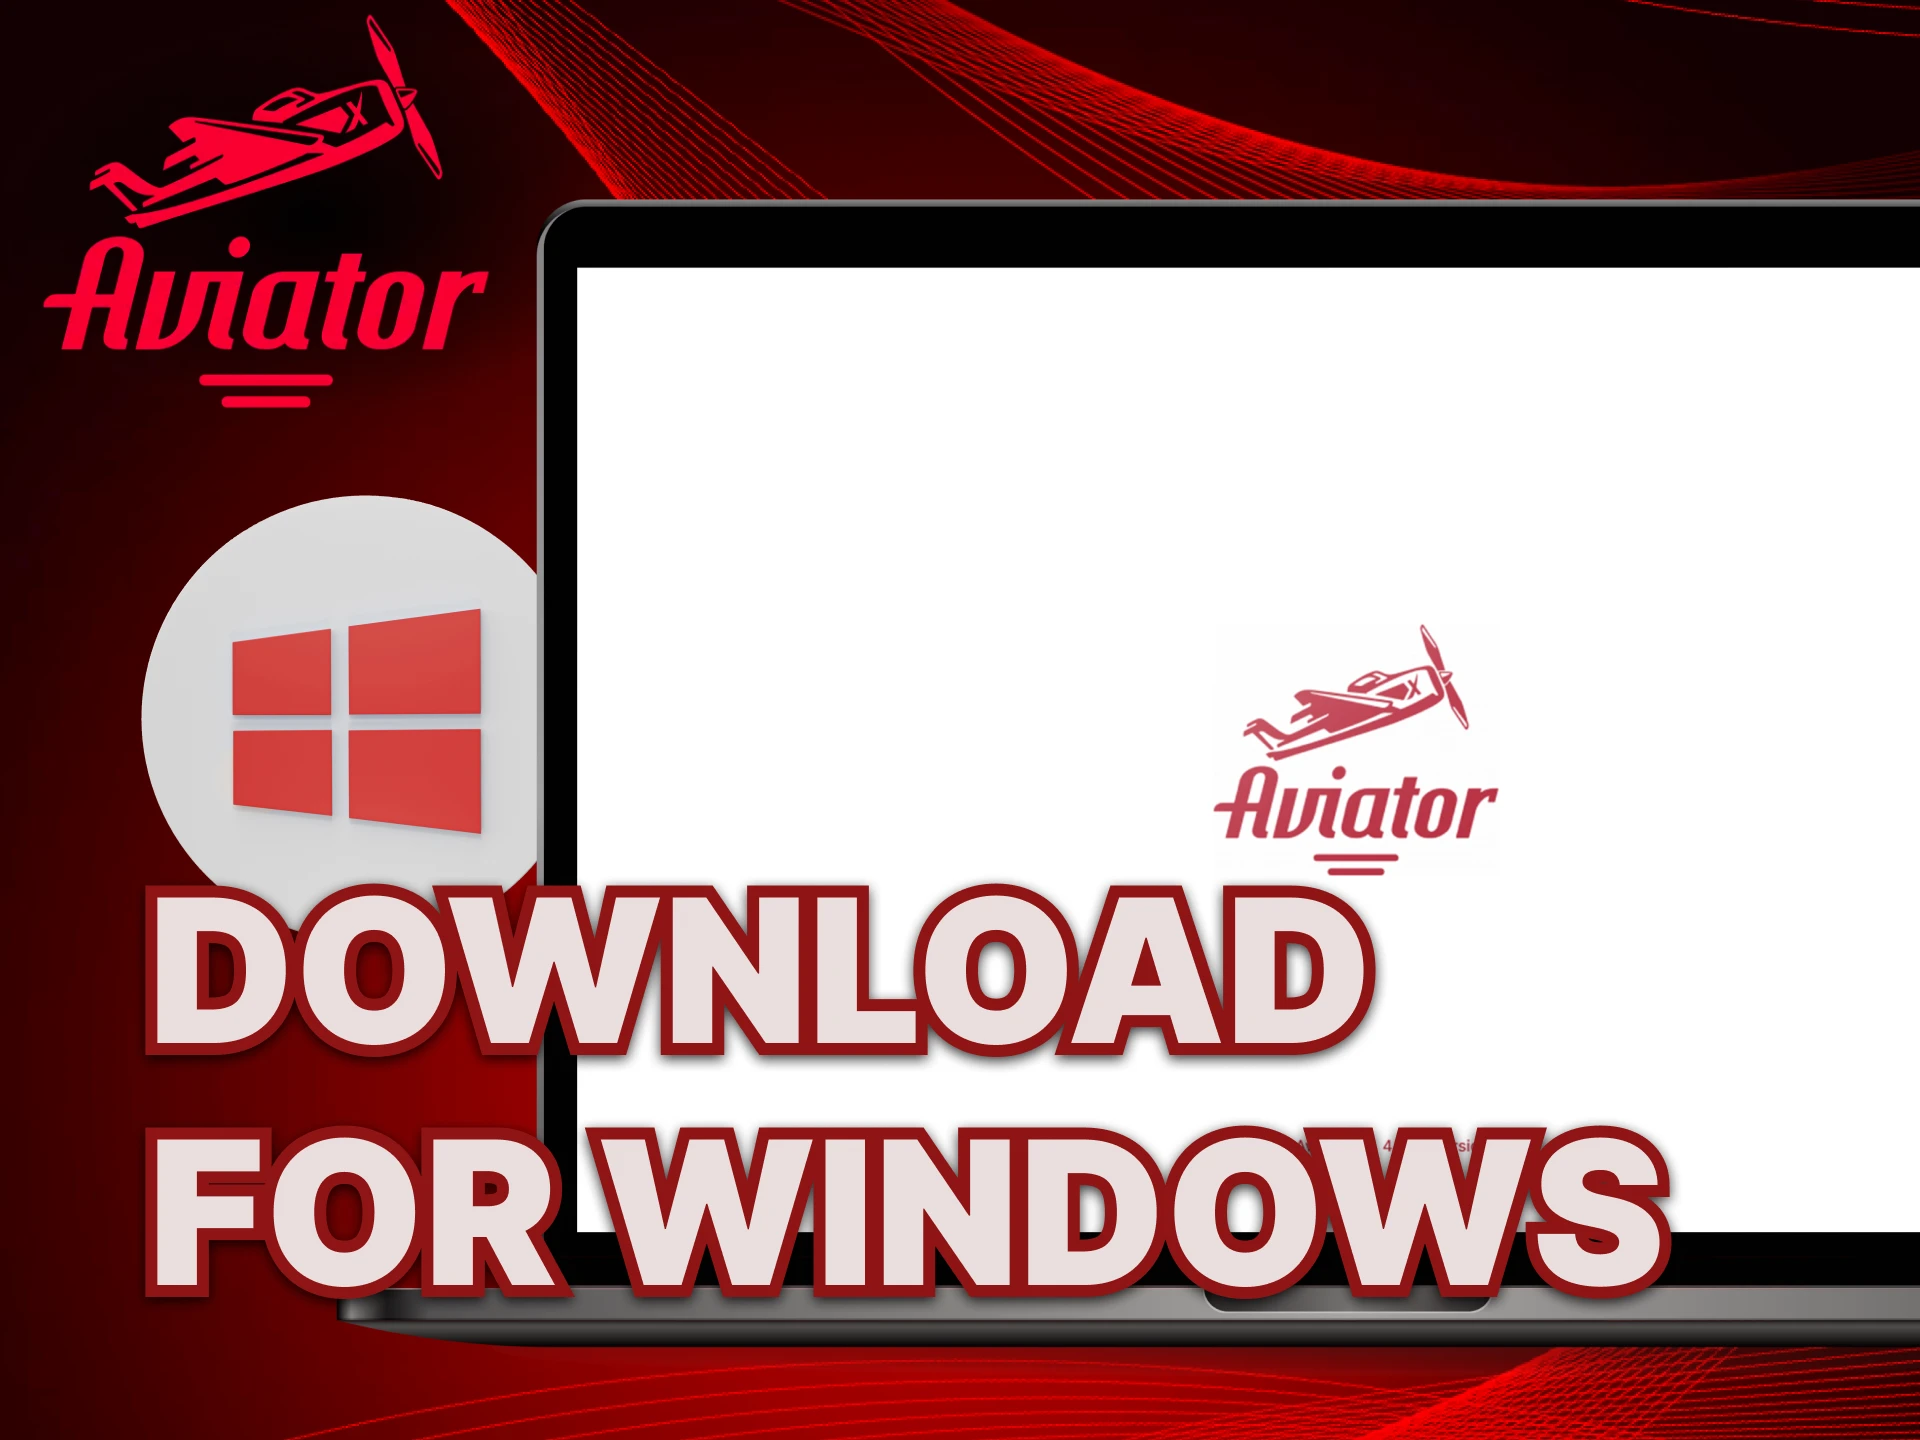 How to download the Aviator application for Windows computer.